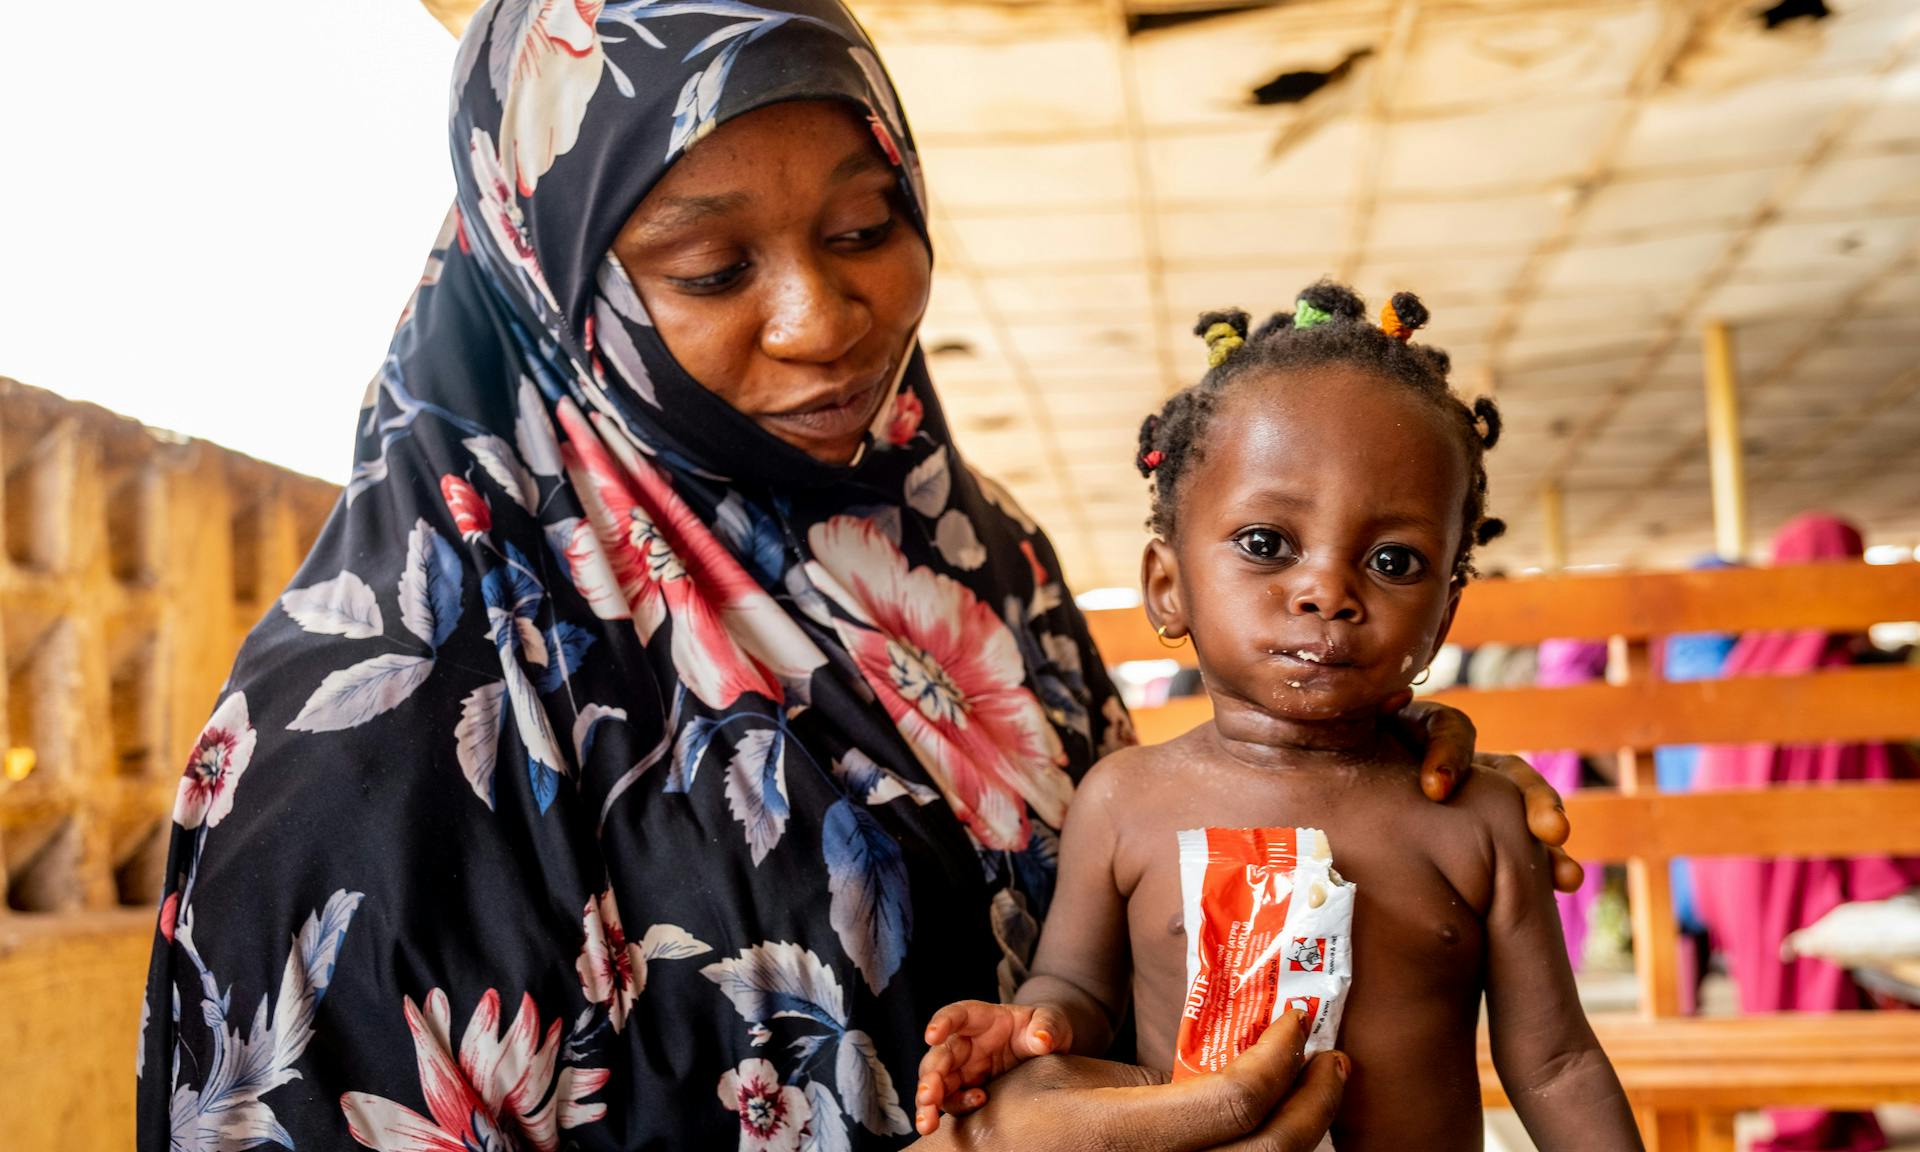 Hafsat is 7-months old, she's eating ready-to-use therapeutic food (RUTF) which is helping save her from malnutrition.